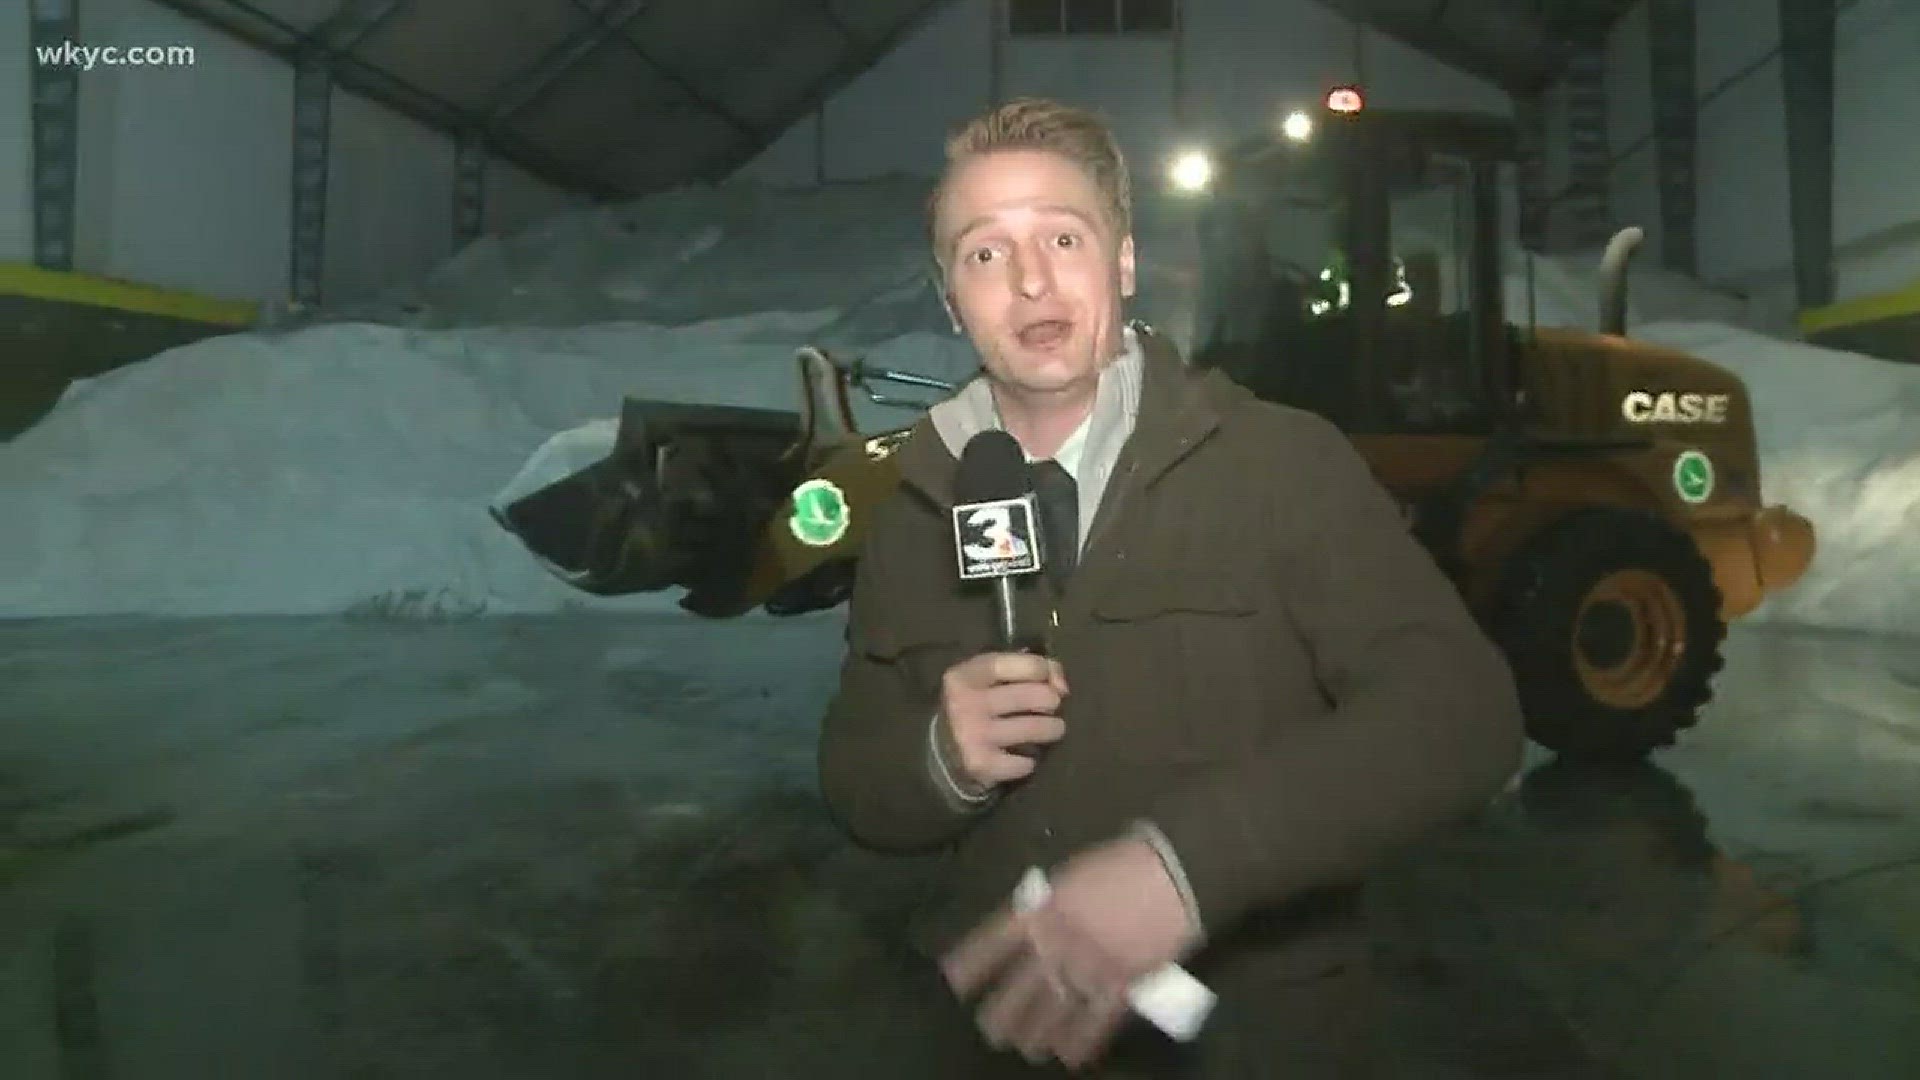 Jan. 12, 2018: As the winter storm approaches, ODOT is preparing to battle the ice and snow. WKYC's Will Ujek has some tips on how you can prepare.